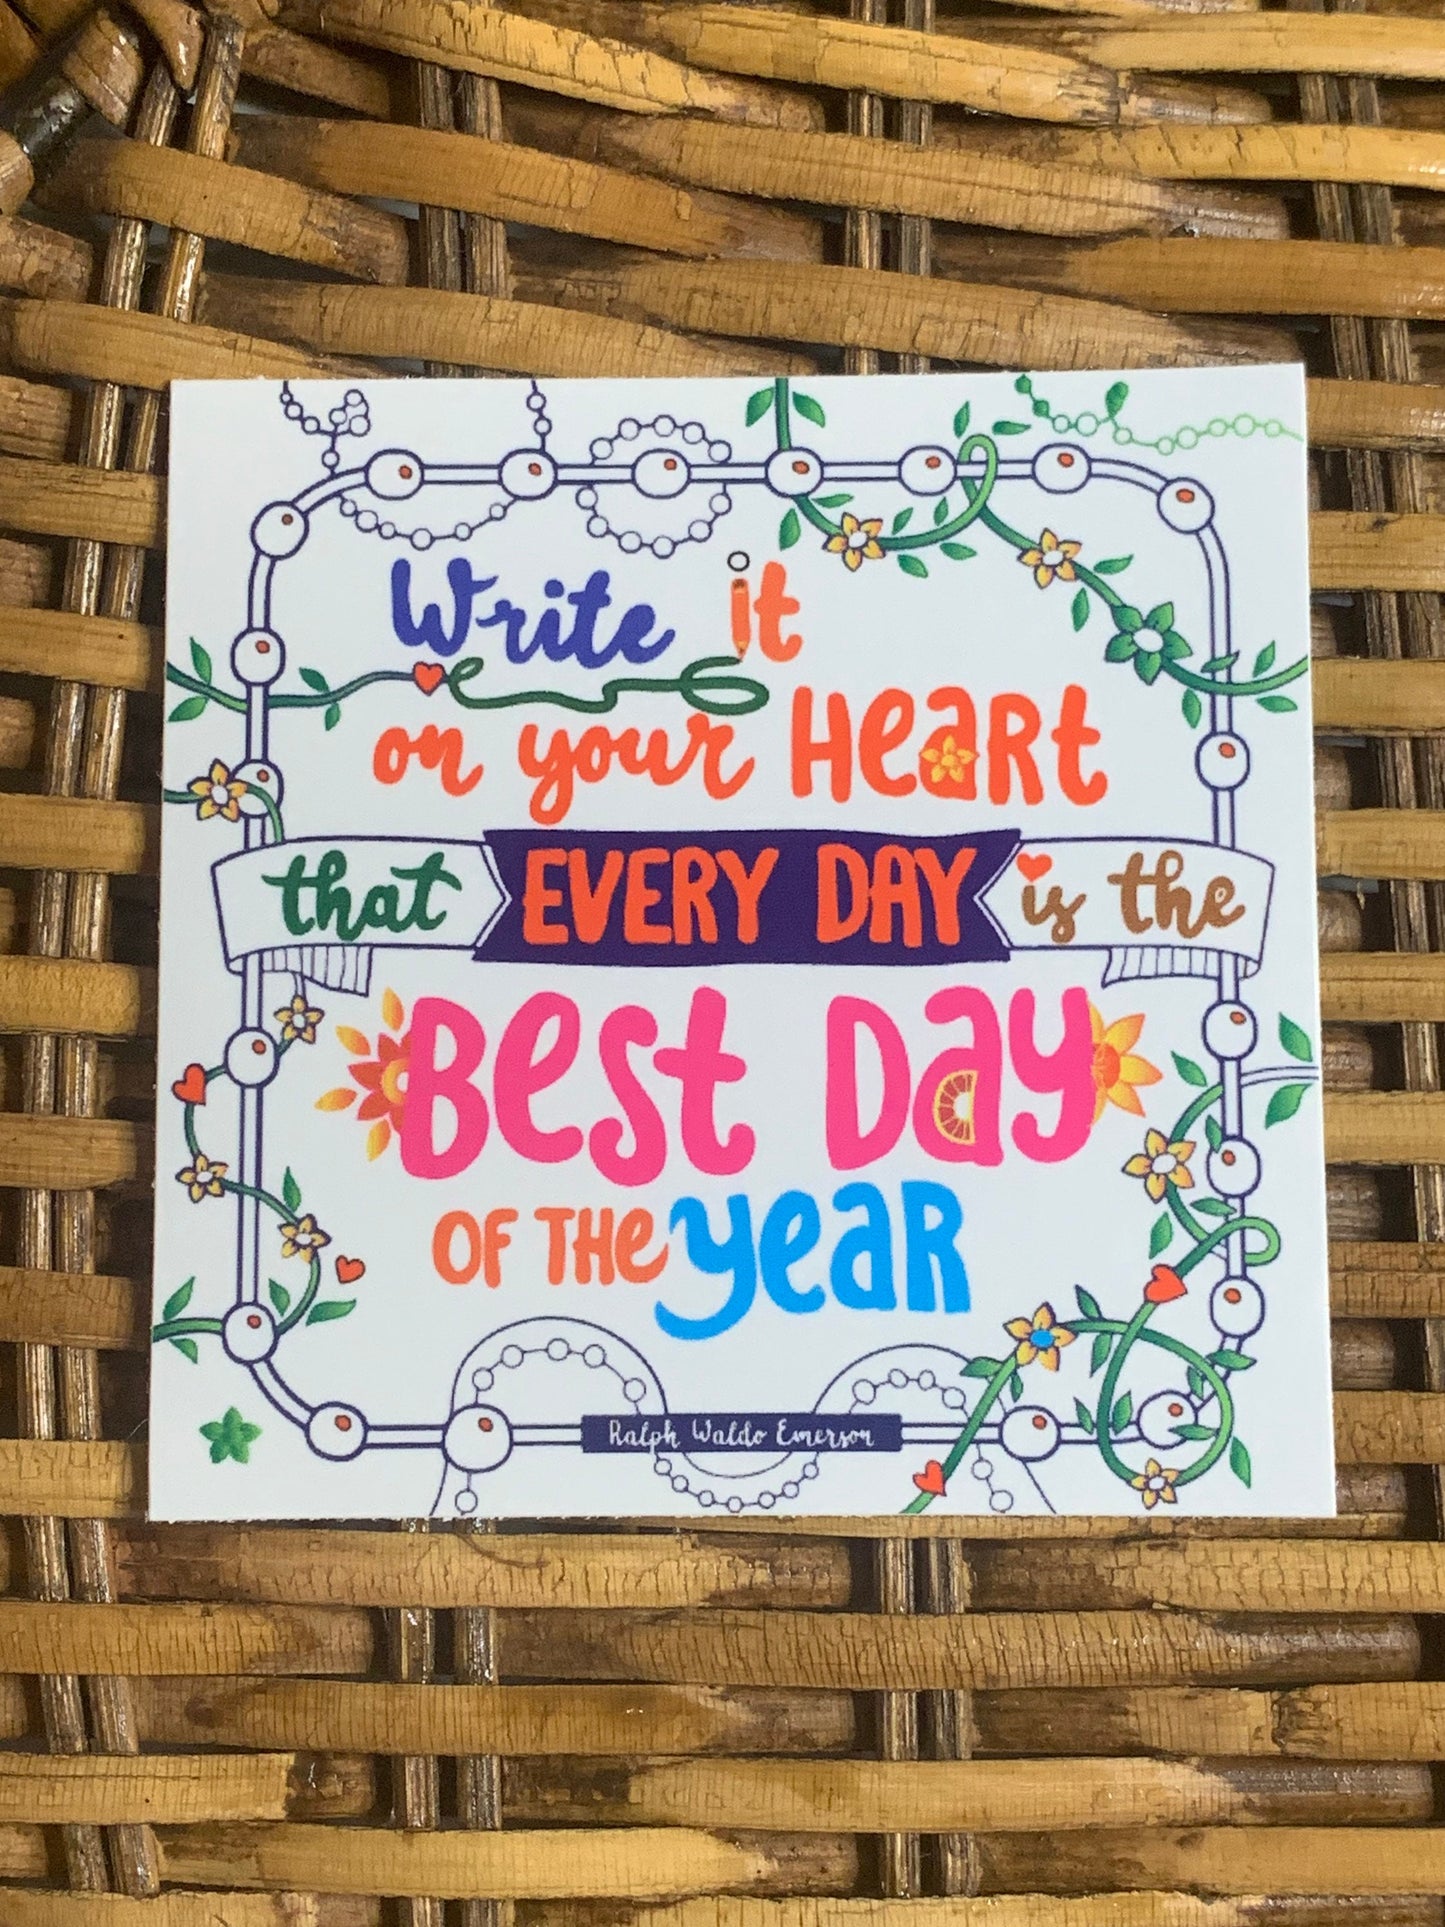 Write It On Your Heart That Every Day Is The Best Day Of The Year Vinyl Sticker